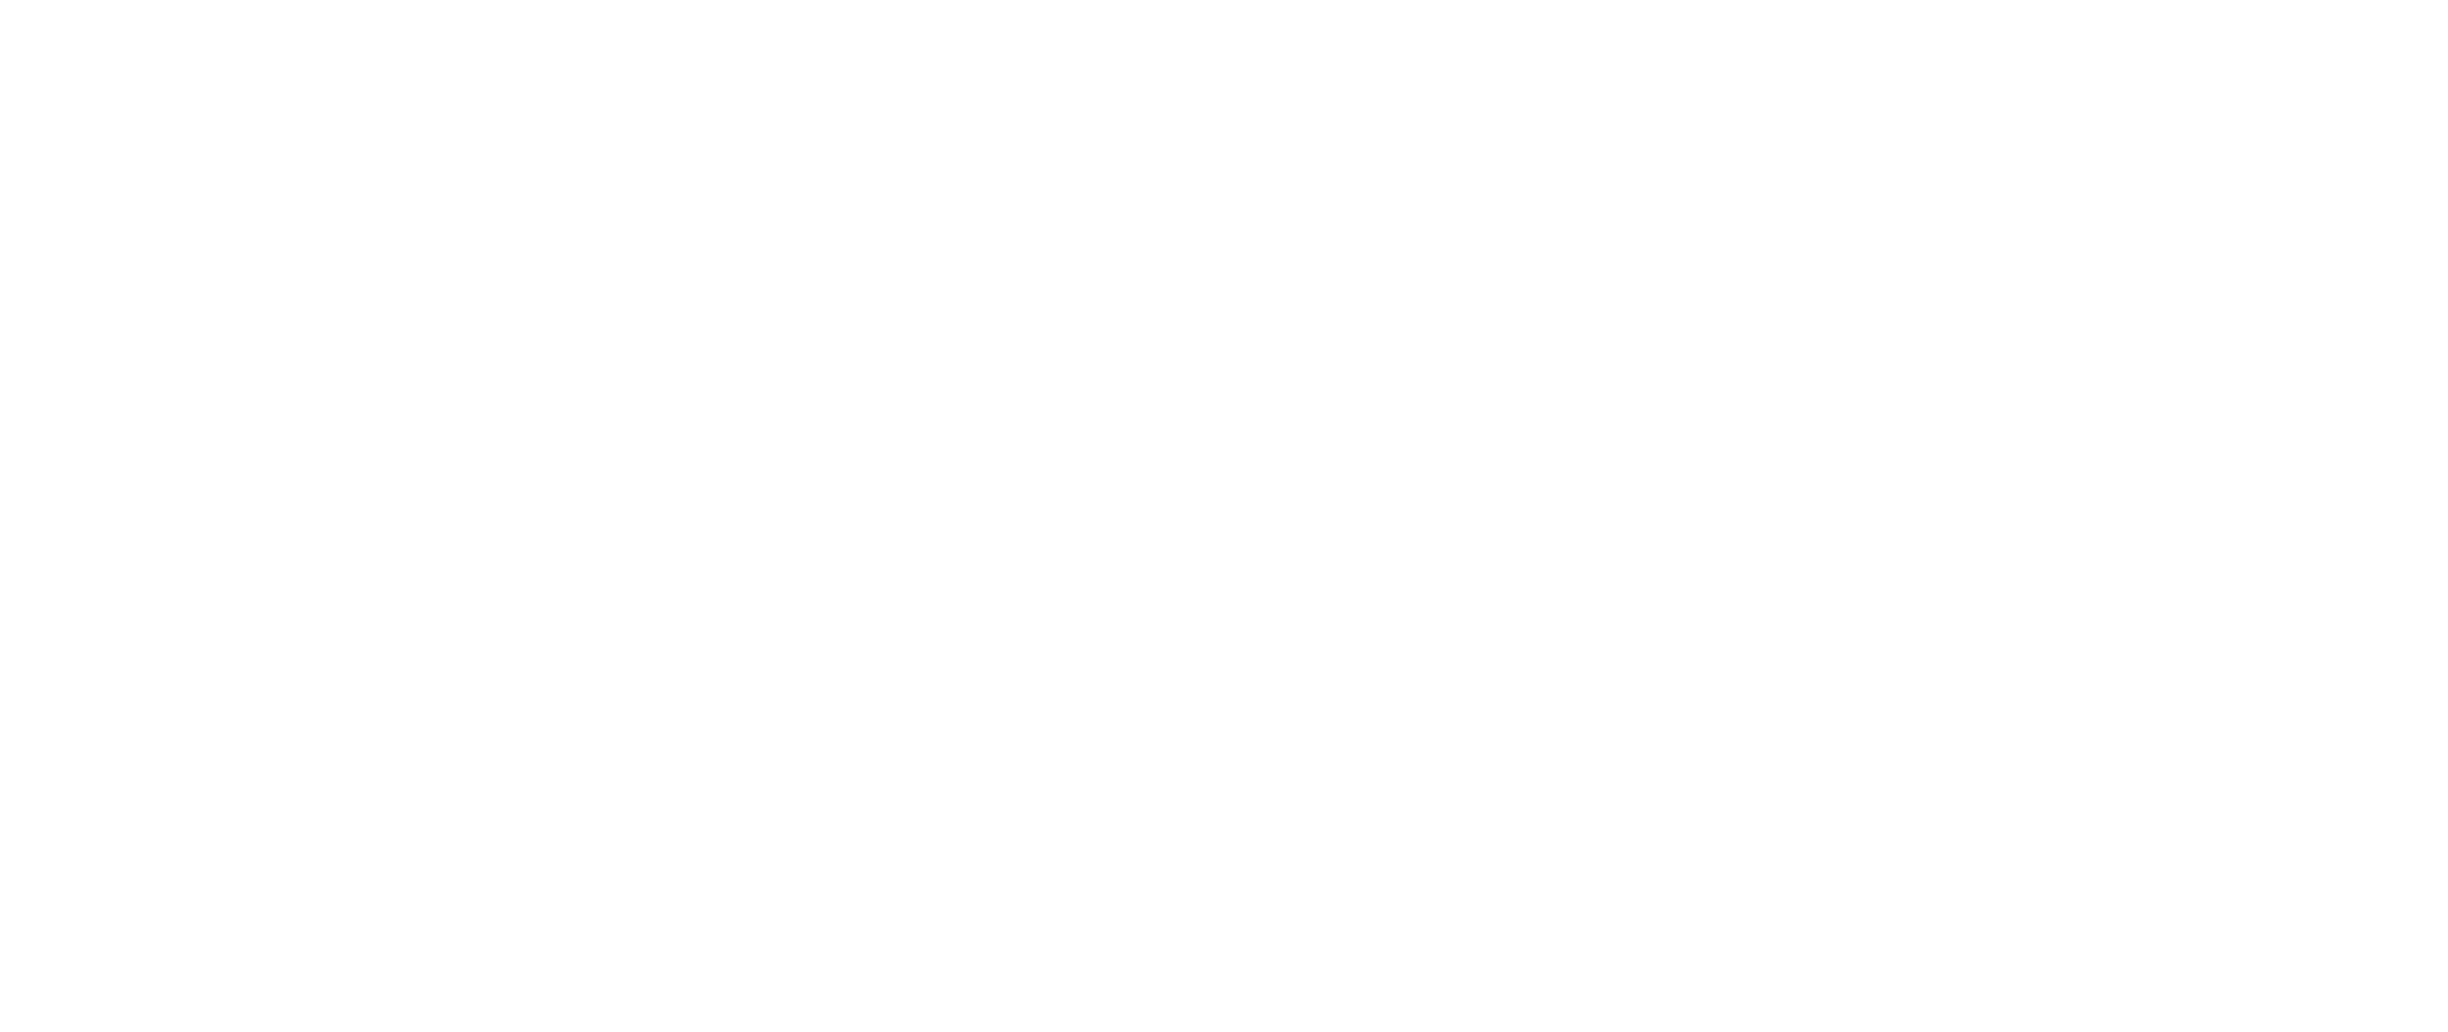 The White Rose - in Nazi Germany